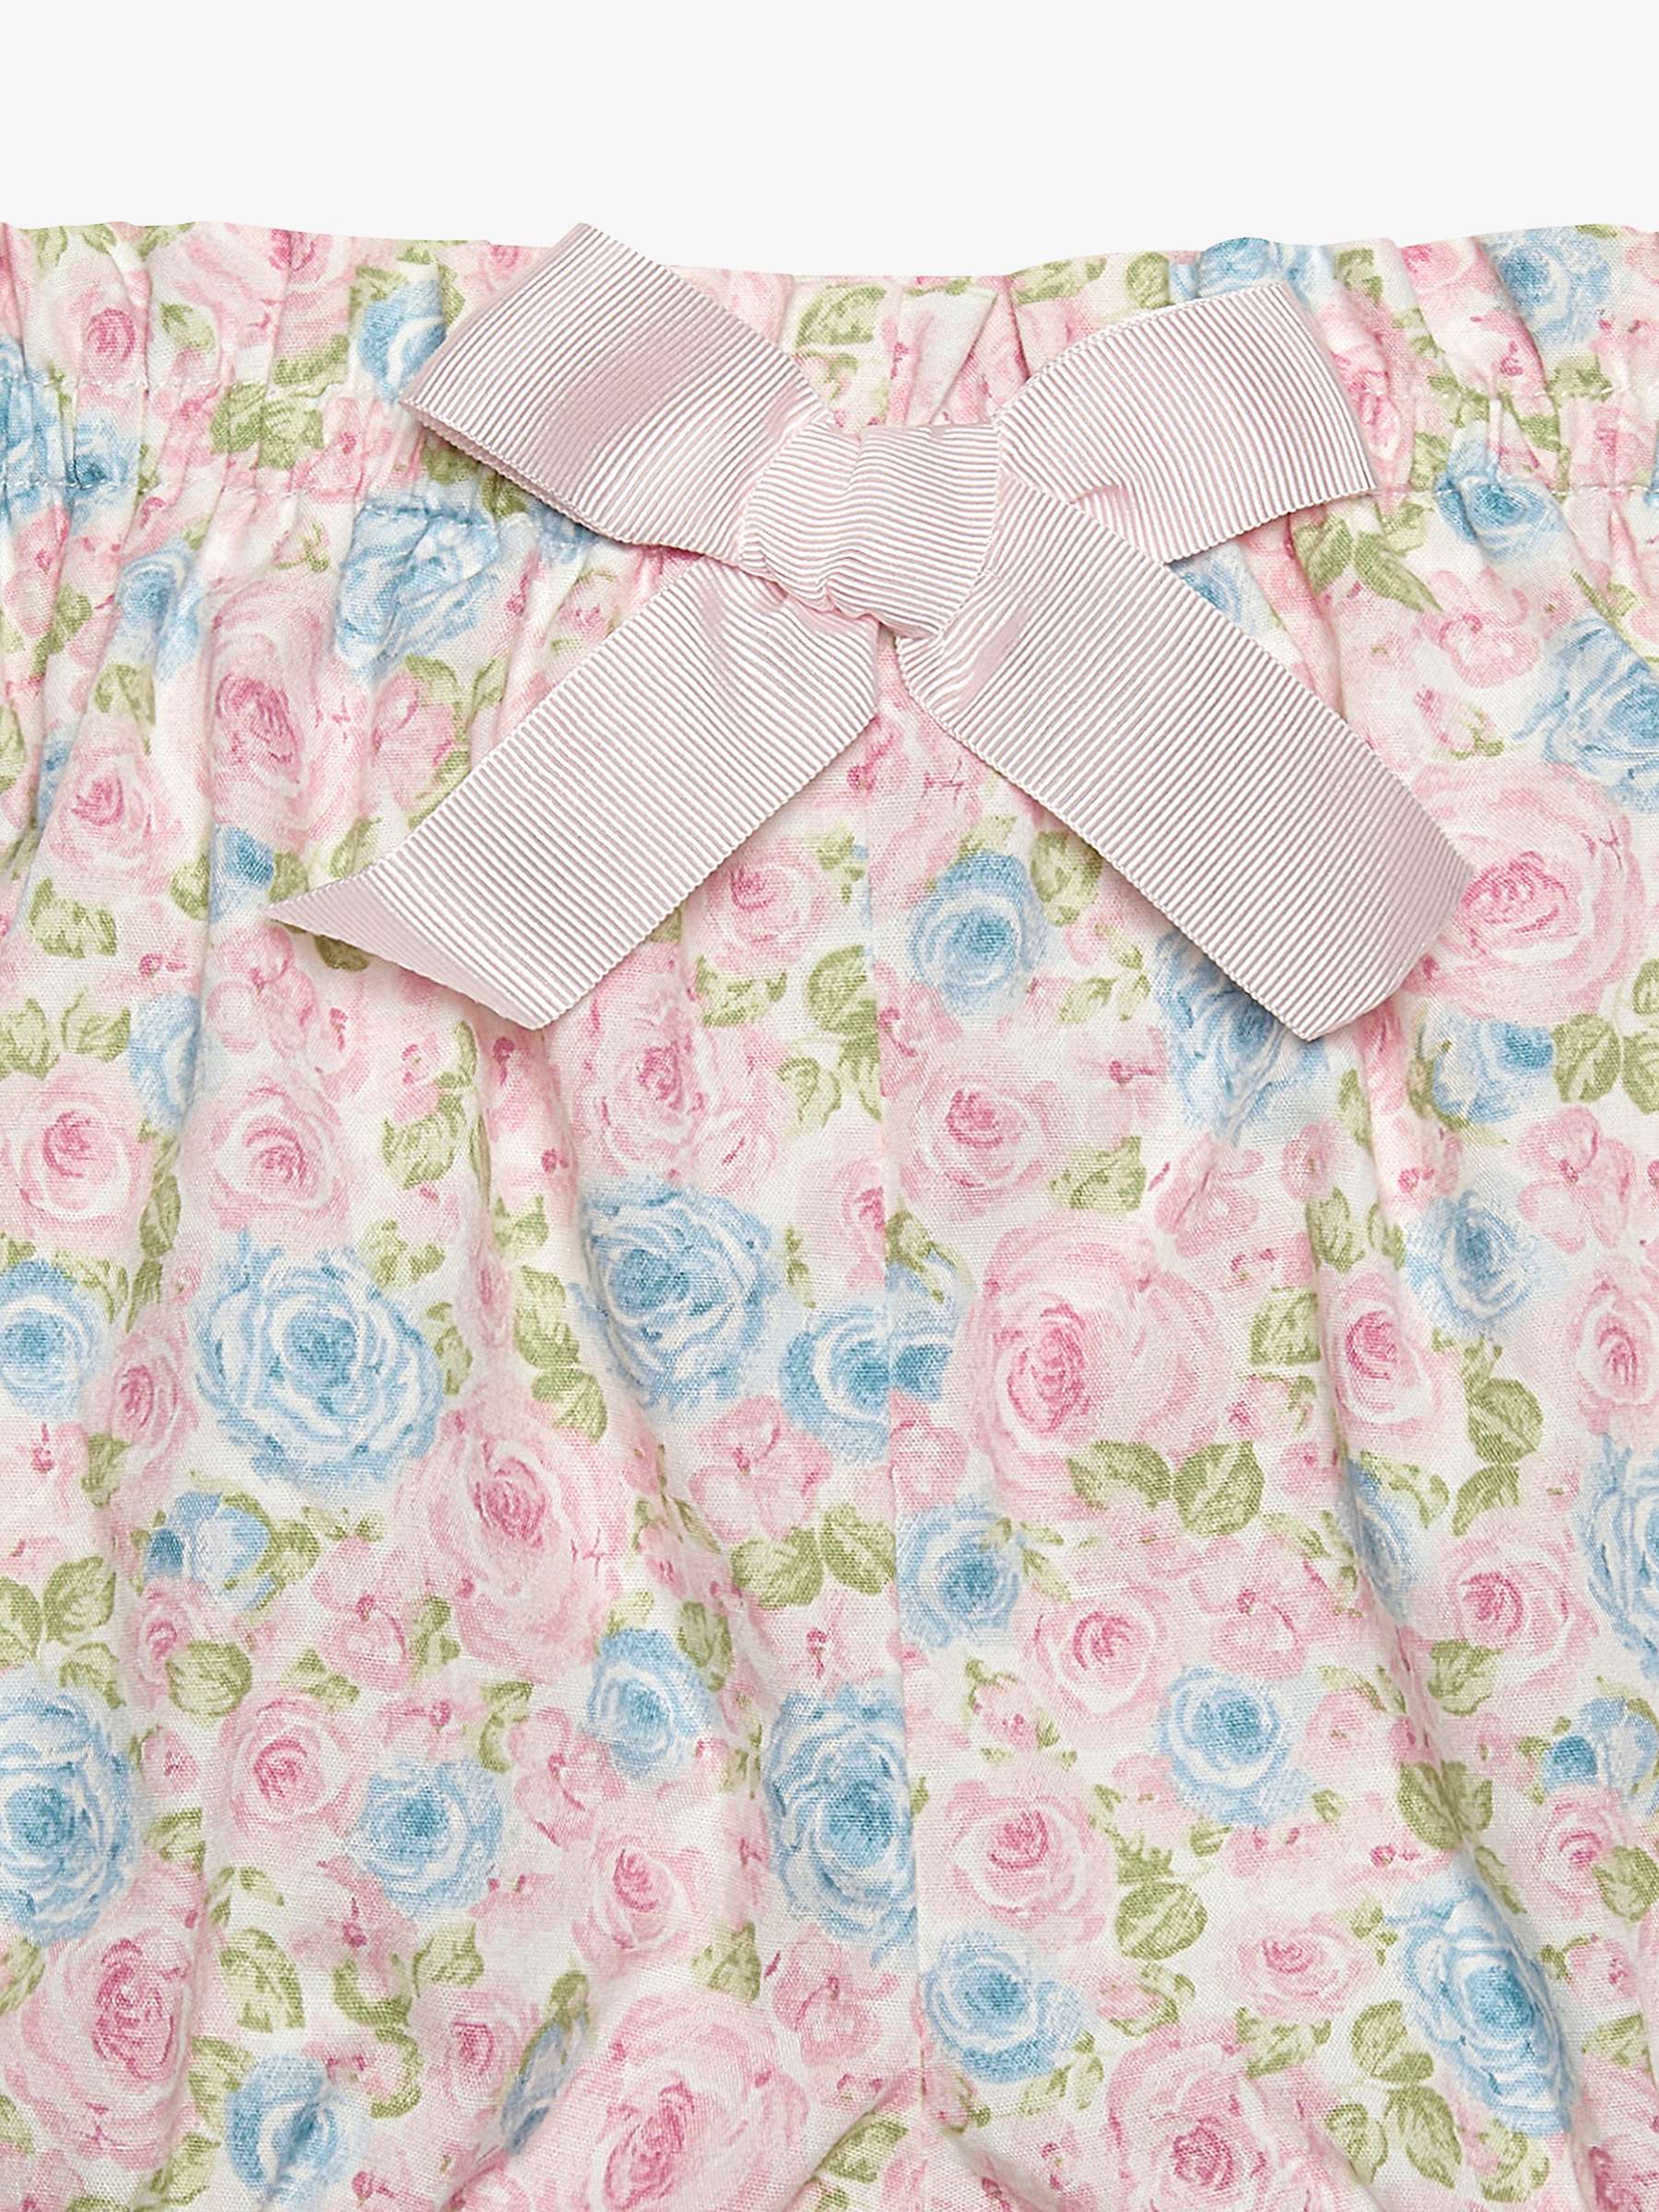 Buy Trotters Baby Alice Floral Bloomer Shorts, Multi Online at johnlewis.com